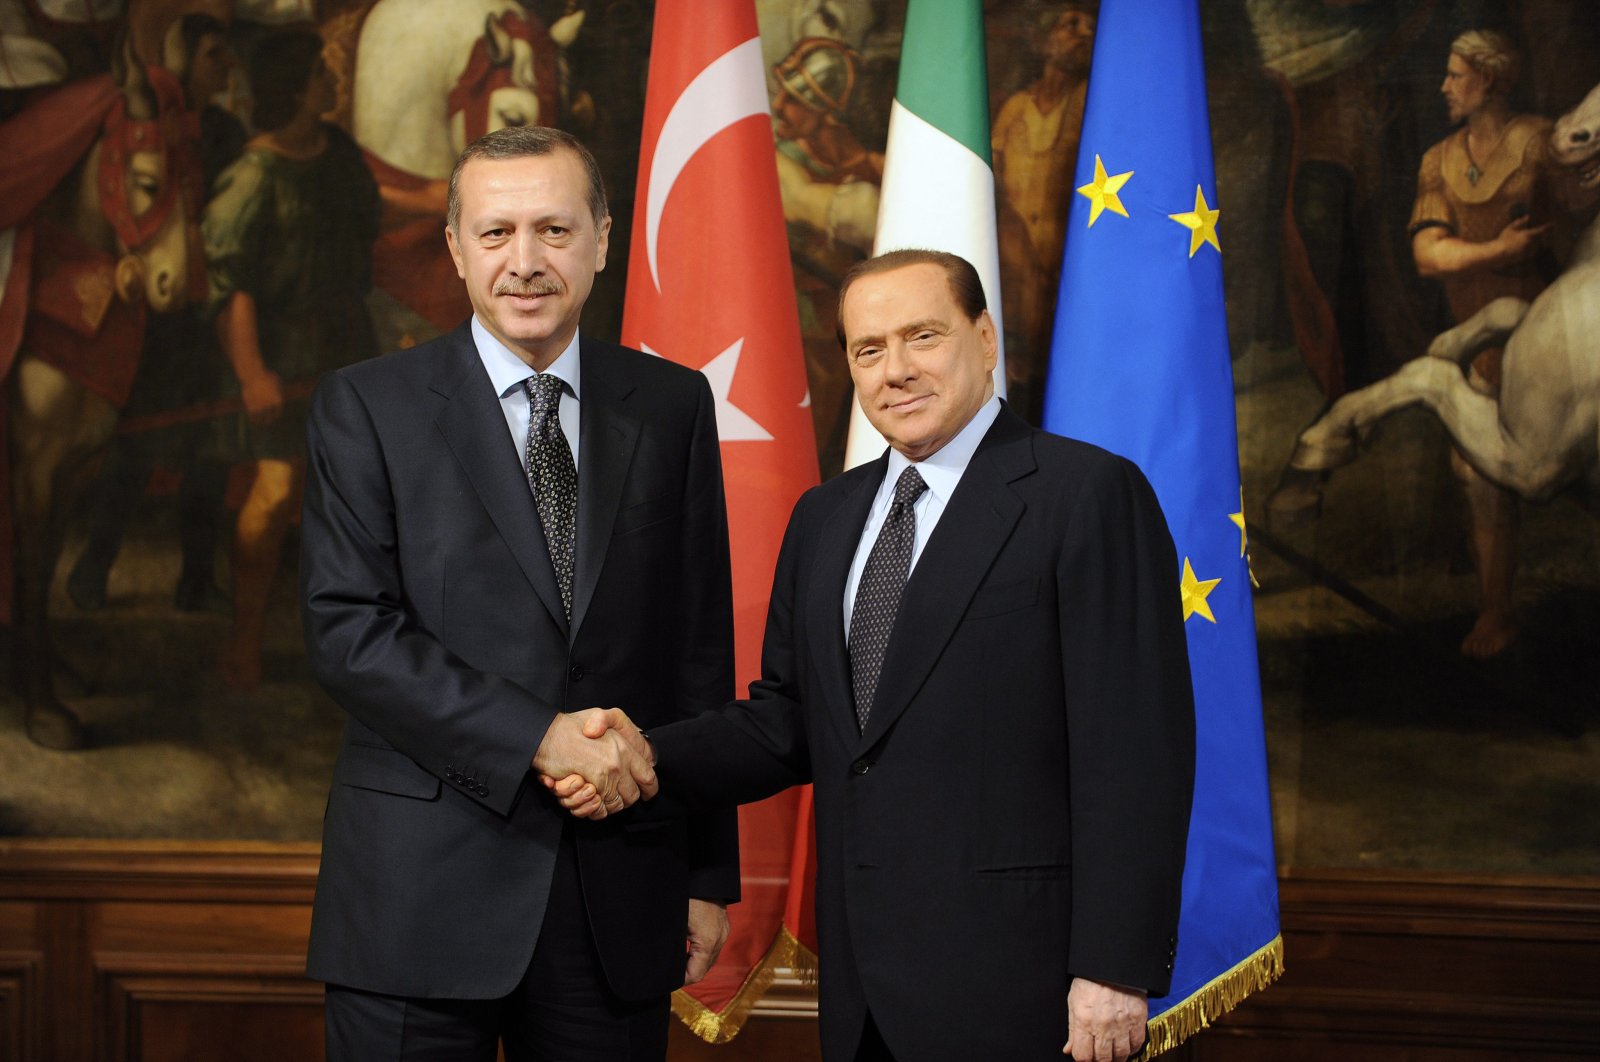 Then-Prime Minister Recep Tayyip Erdoğan shakes hands with Italian Prime Minister Silvio Berlusconi (R) during their meeting at Chigi Palace in Rome, Italy, Nov. 17, 2009. (EPA File Photo)